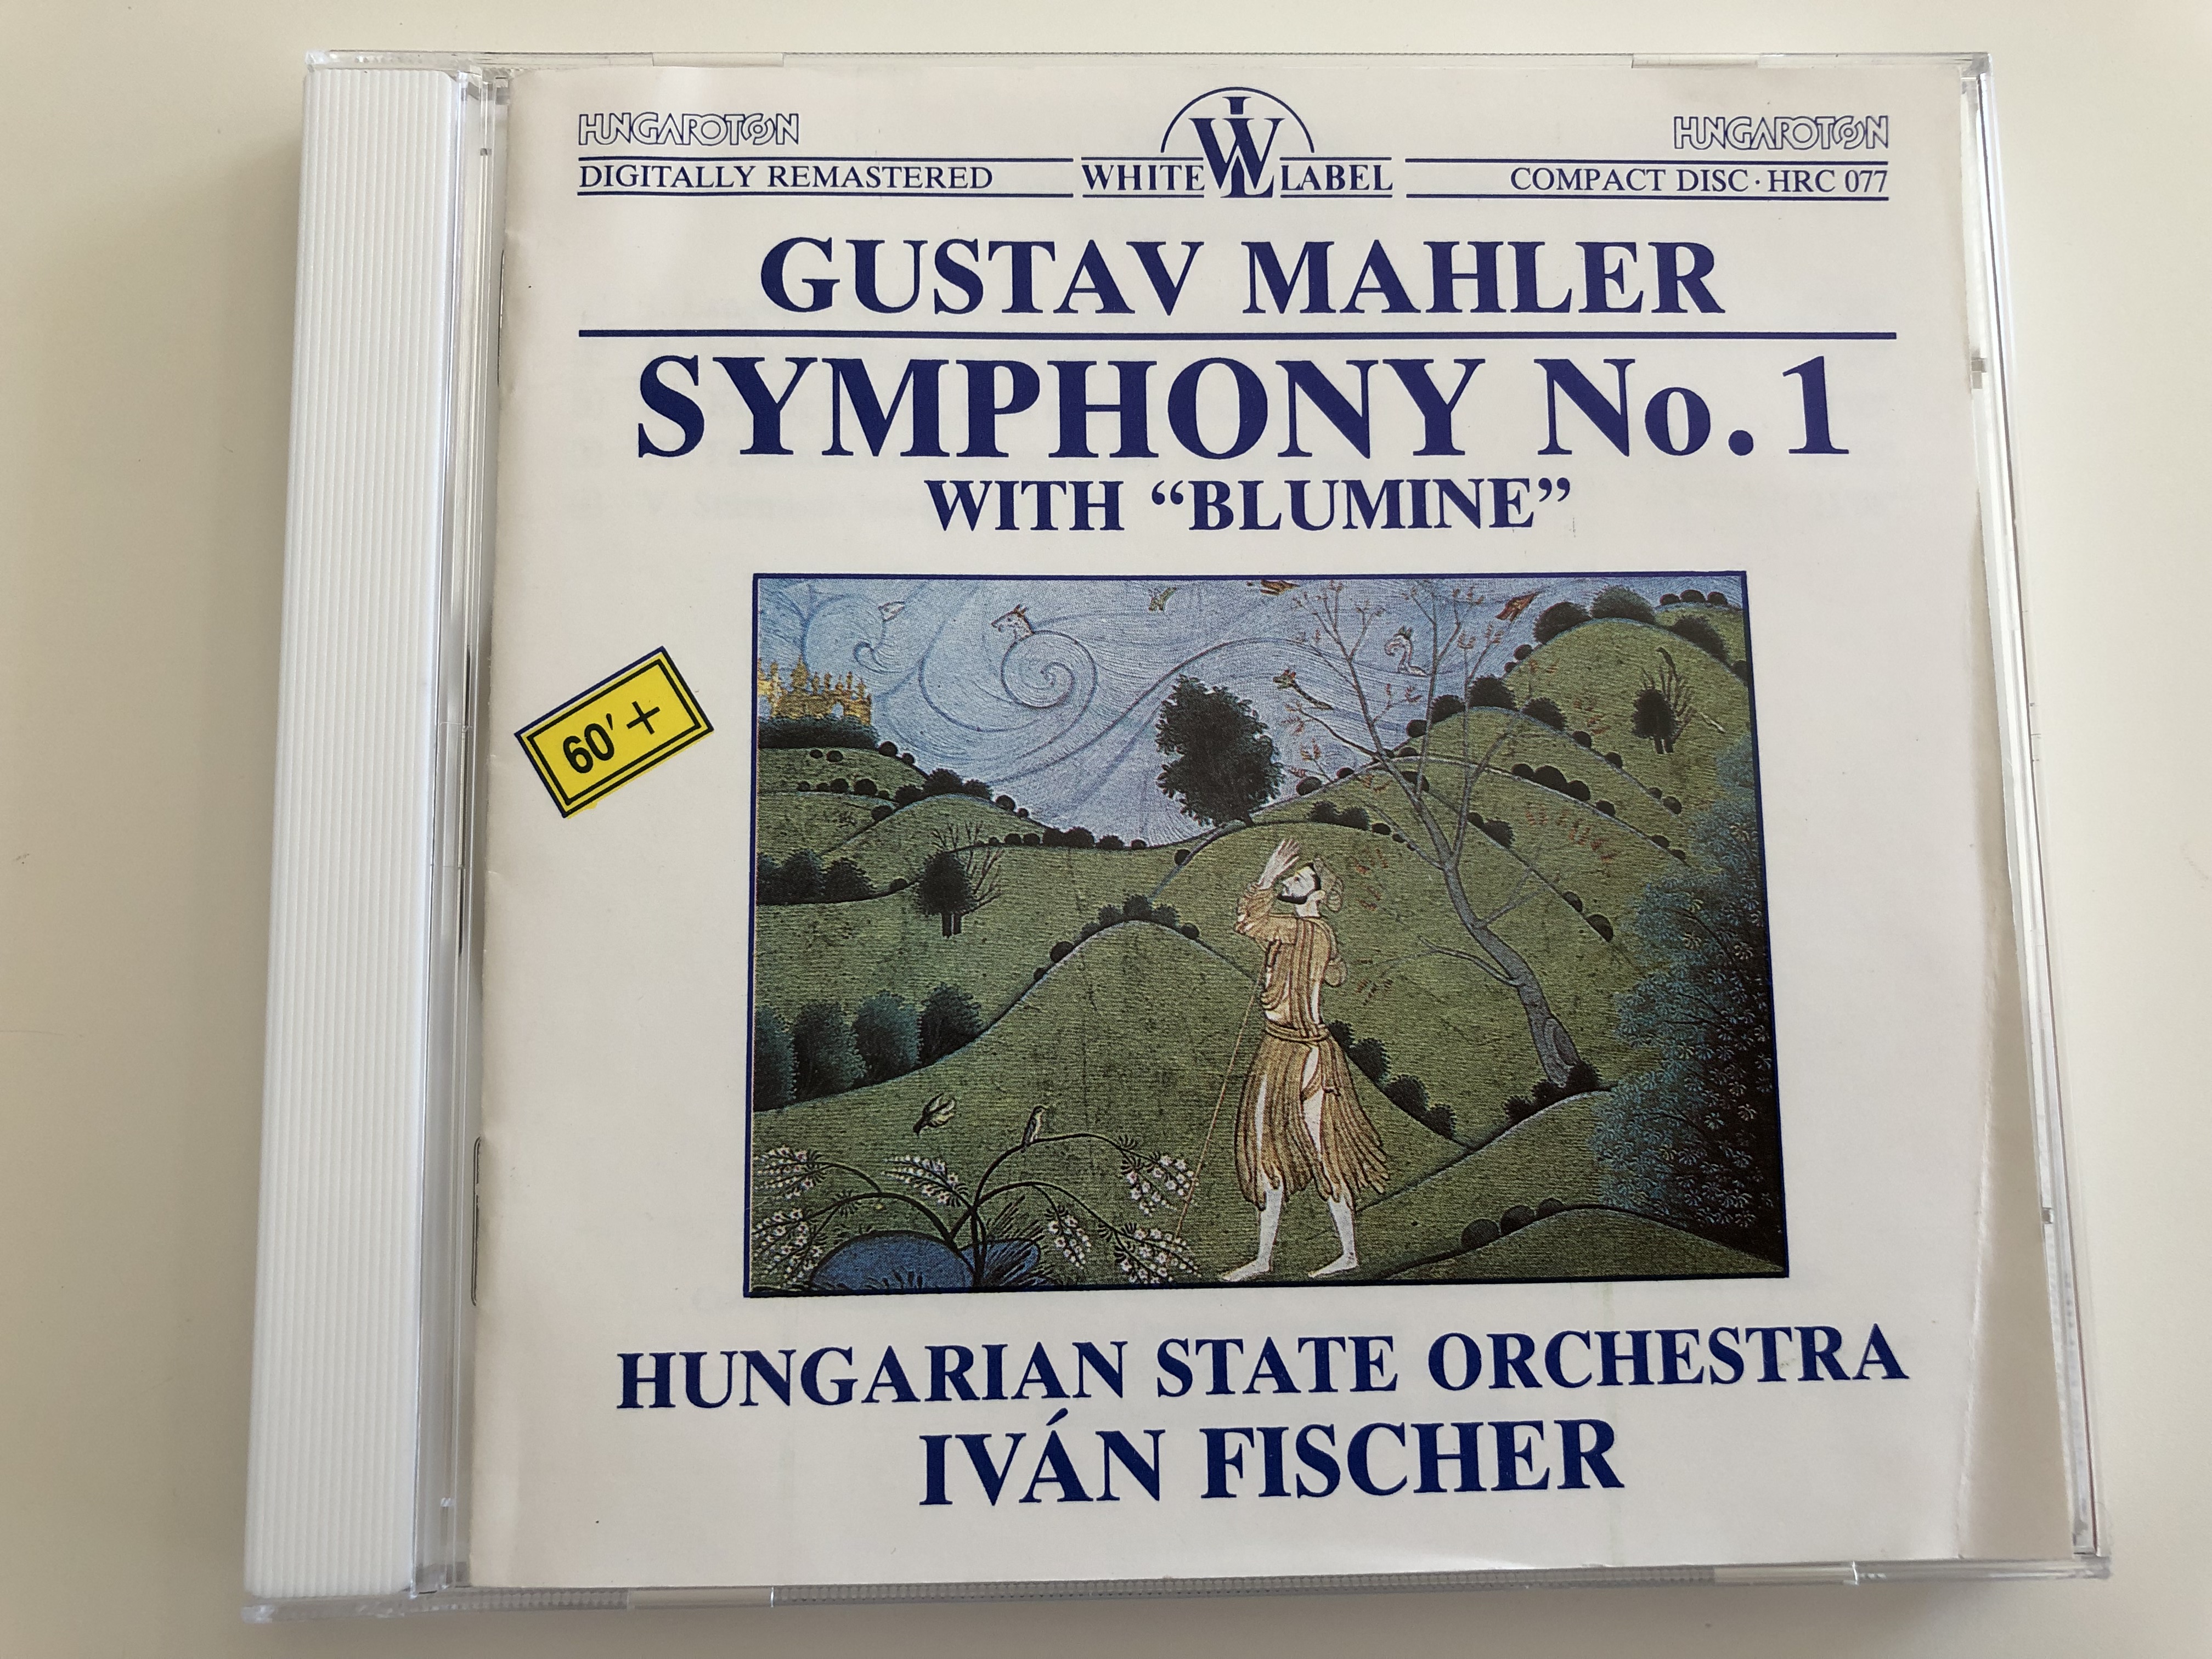 gustav-mahler-symphony-no.-1-with-blumine-hungarian-state-orchestra-conducted-by-iv-n-fischer-hungaroton-hrc-077-white-label-1-.jpg